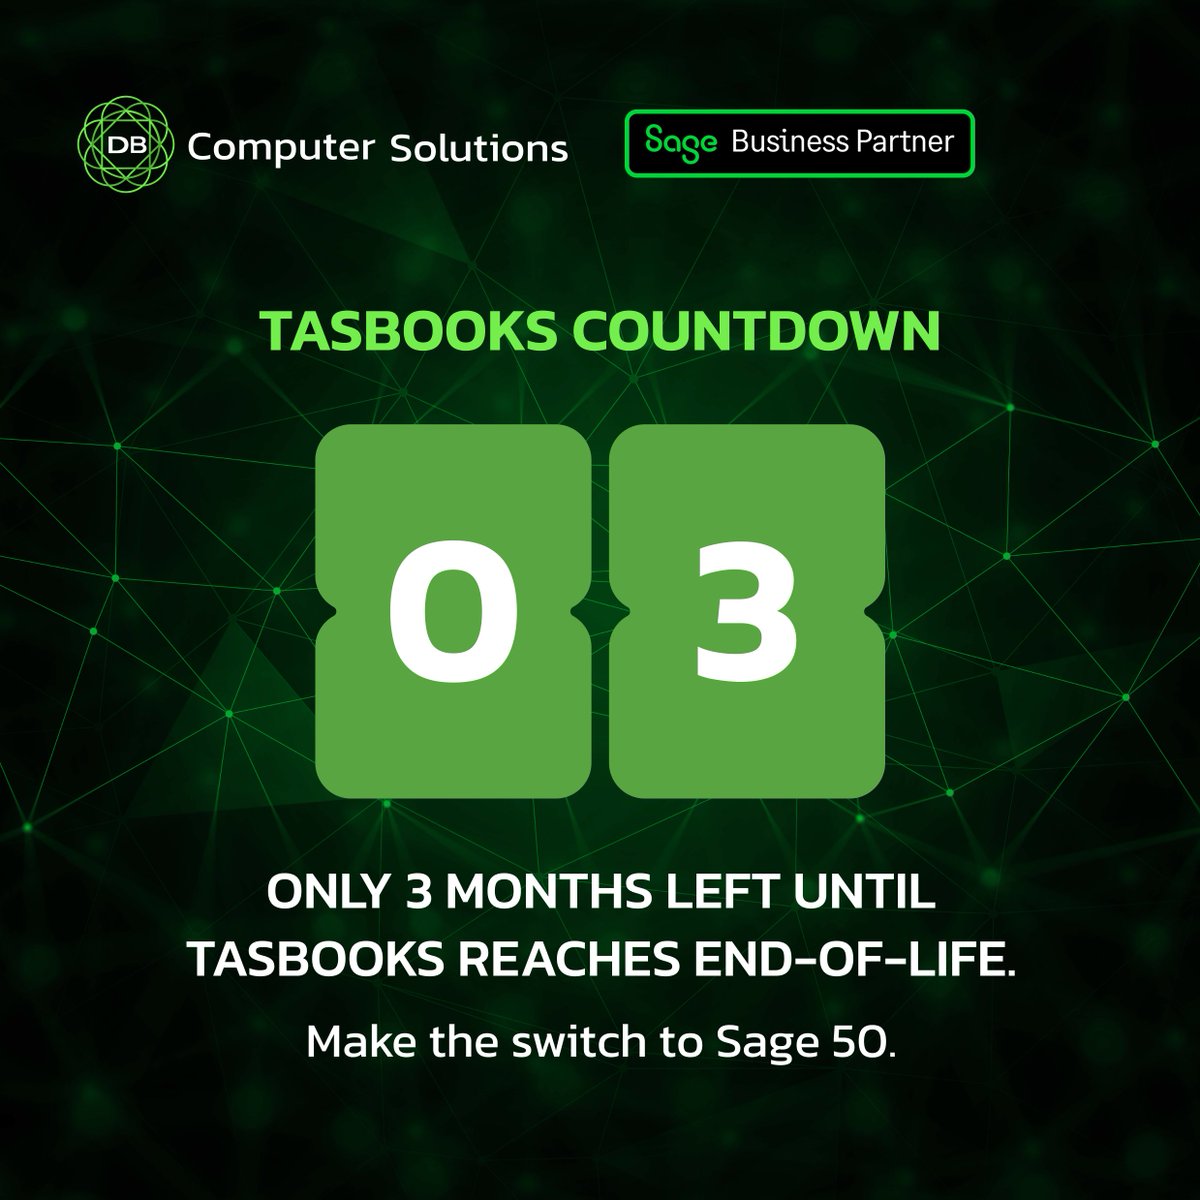 There's only 3 months left until #TASBooks reaches end-of-life in August this year.

Ready to make the move? Explore our website for comprehensive resources to facilitate a smooth transition: https:// dbcomp.ie/sage-50/

#Sage50 #UpgradeNow #Accounting #BookKeeping